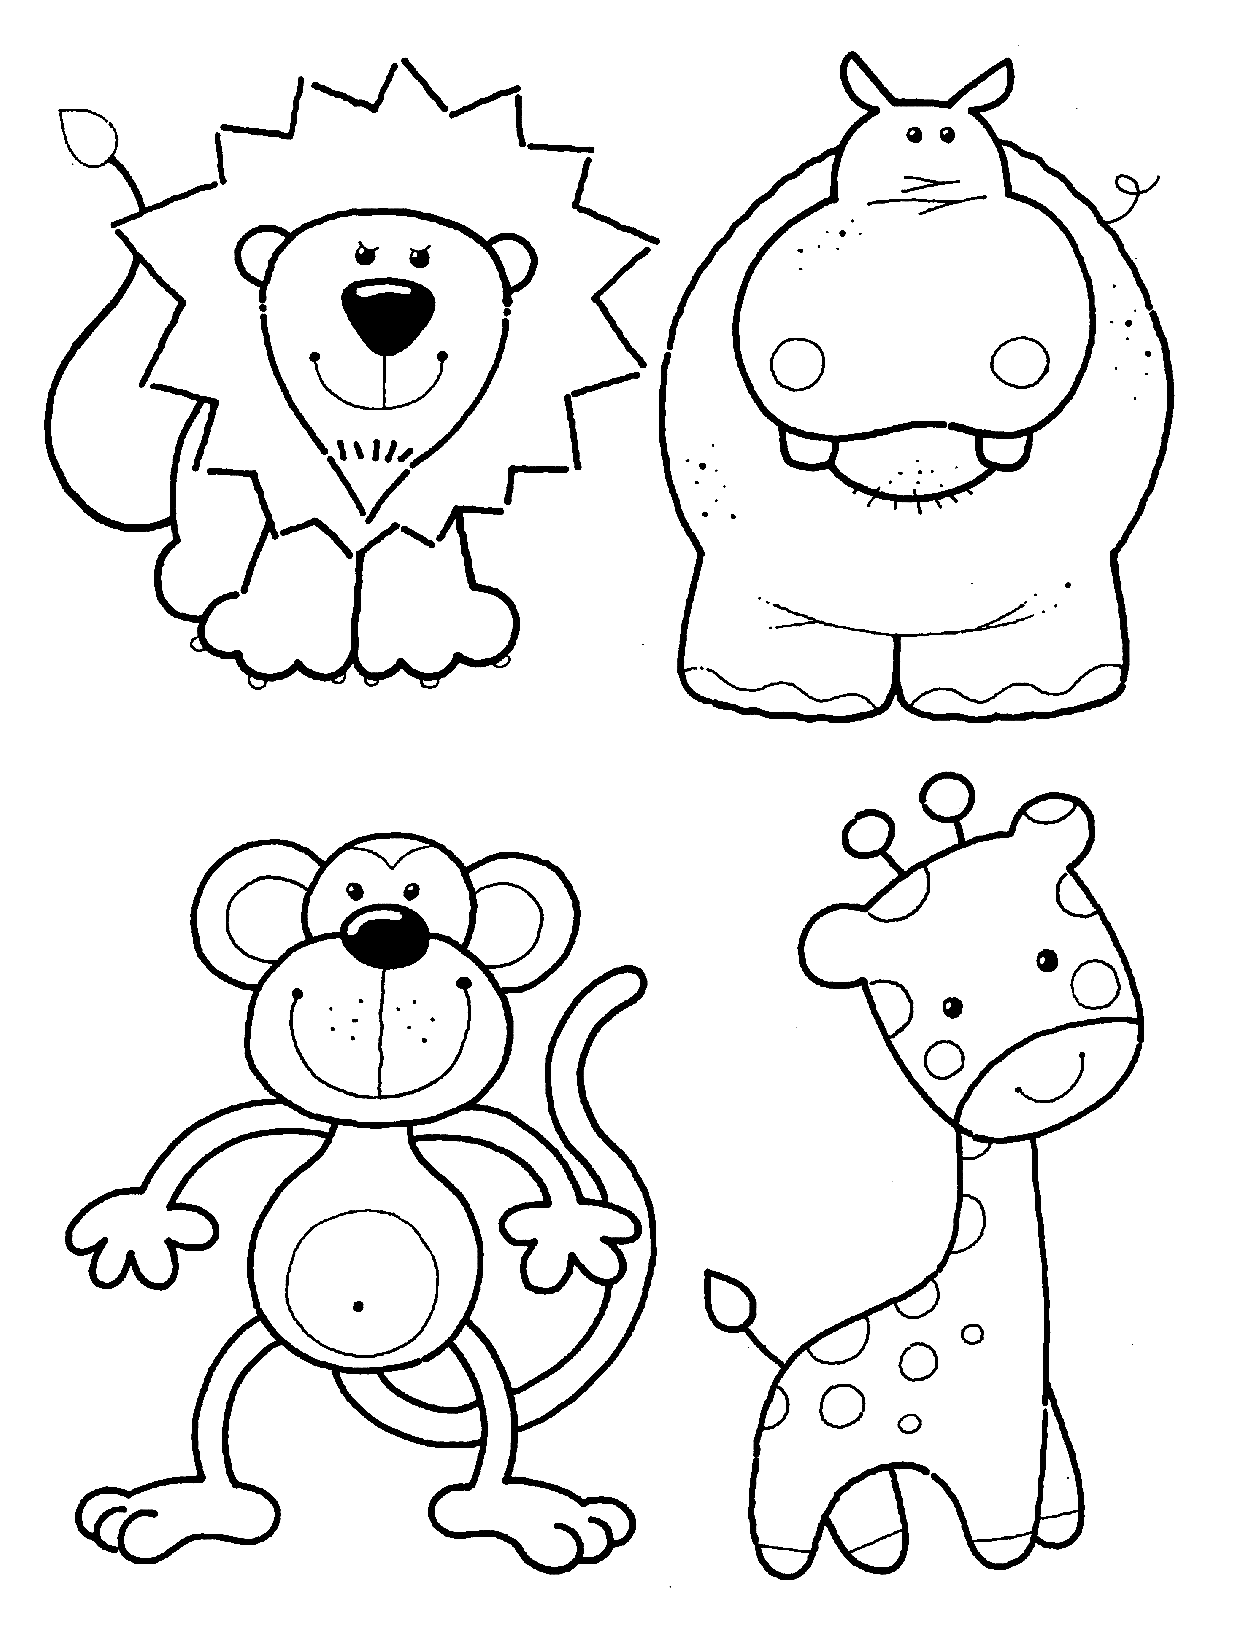 Cute Zoo Animals Coloring Page